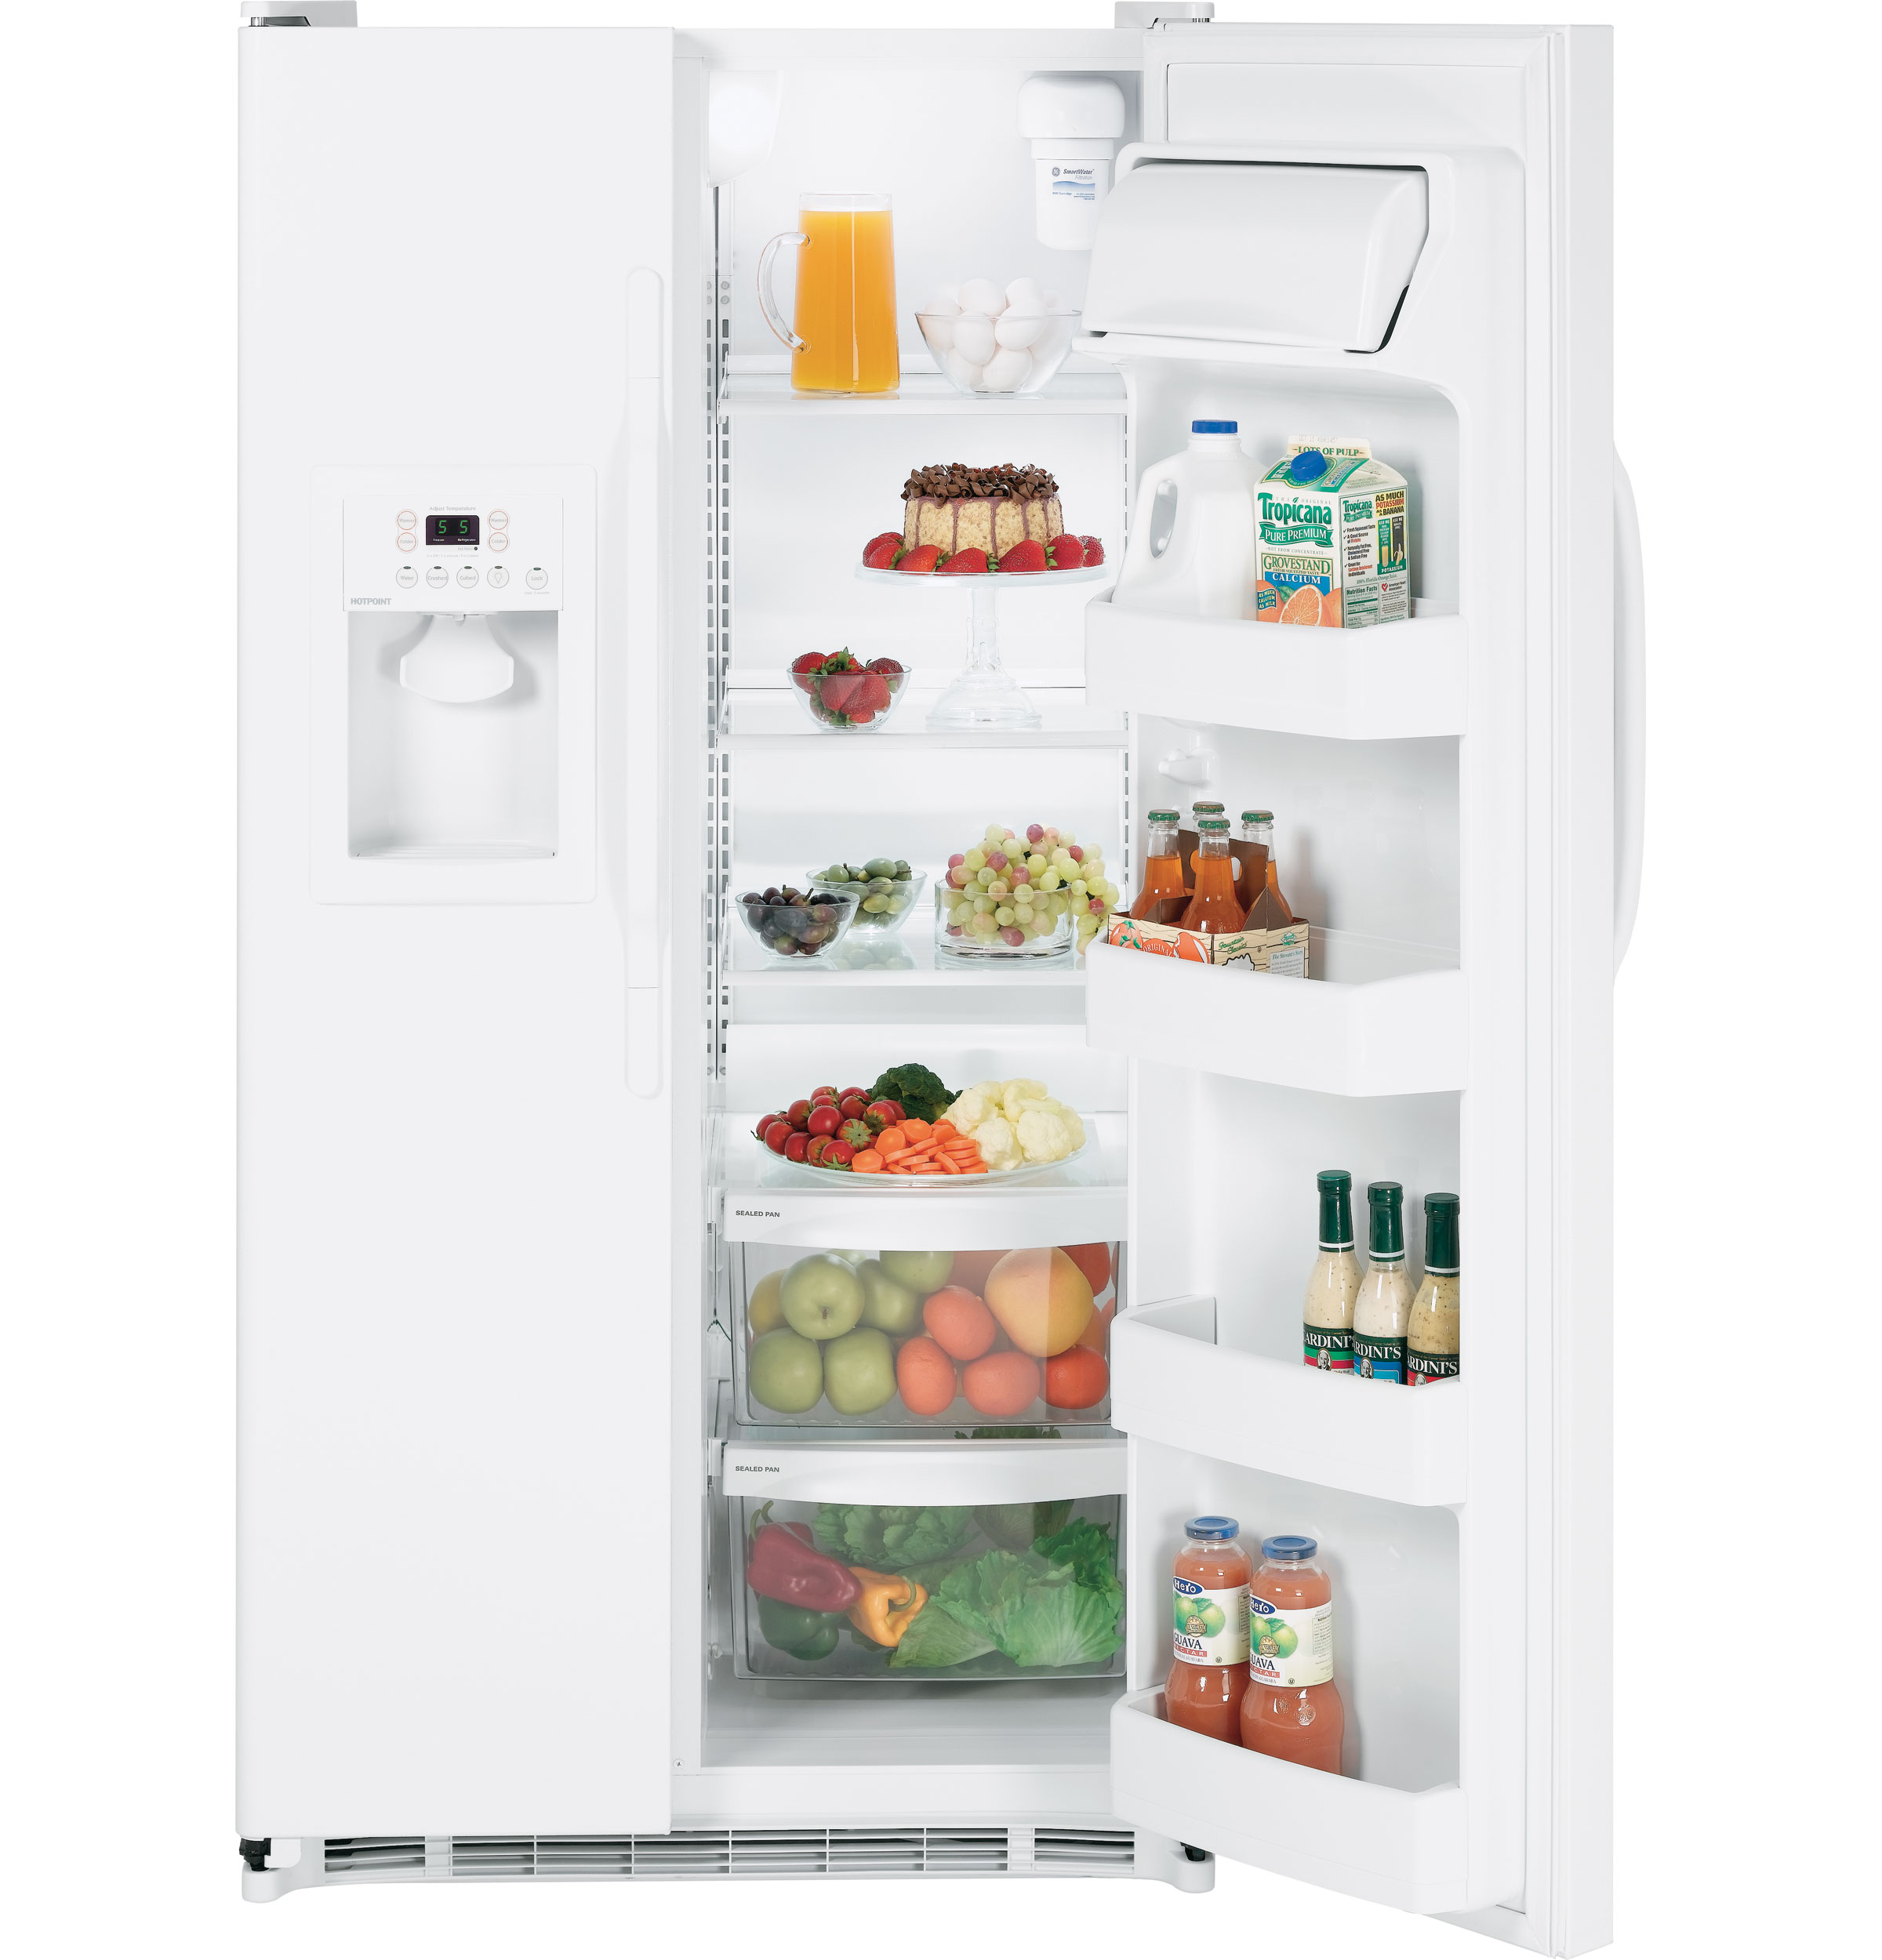 Hotpoint® 25.0 Cu. Ft. Side-By-Side Refrigerator with Dispenser